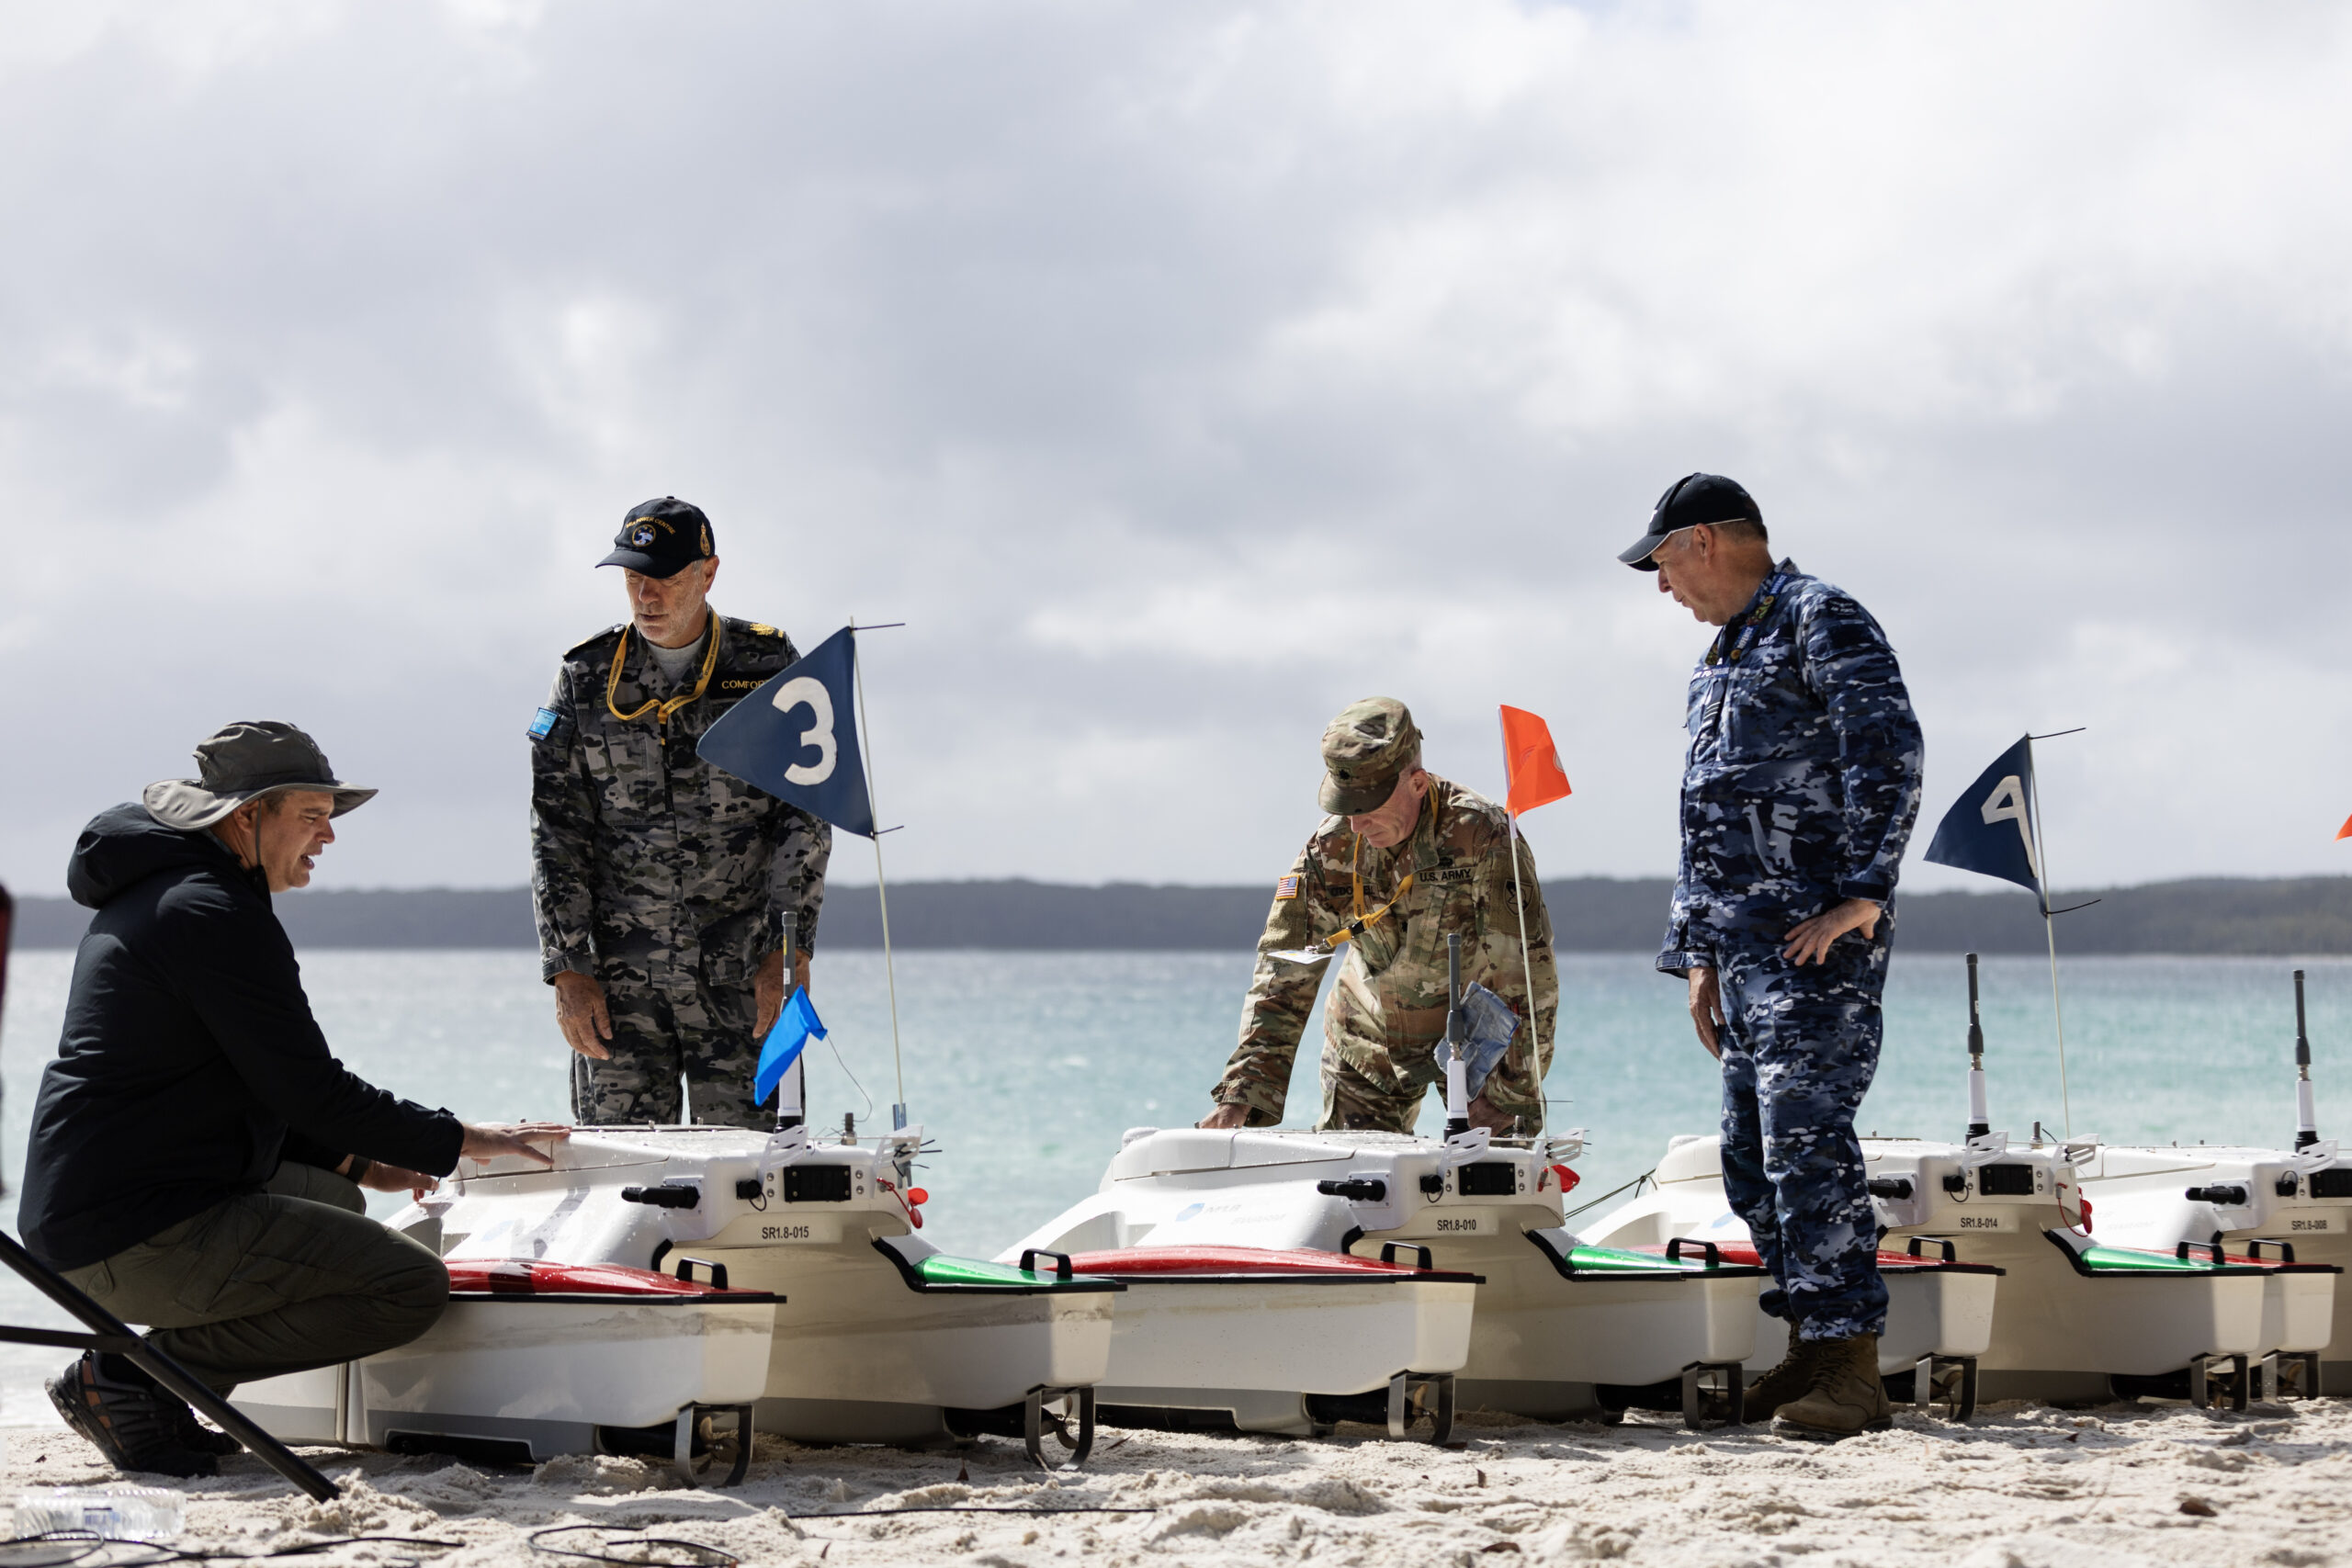 (From Left) Michael Novitzky, Warrant Officer Richard Comfort, Lieutenant Colonel Charles O'Donnell and Squadron Leader Robert Morris discuss the SWARMS Sea Robotics unmanned vehicles capability during the Technical Cooperation Program AI Strategic Challenge 2023 at HMAS Creswell, Jervis Bay Territory. *** Local Caption *** The Technical Cooperation Program (TTCP) AI Strategic Challenge (AISC) 2023 will be held at HMAS Creswell, 09-27 October 2023. Bringing together Five Eyes (FVEY) nations personnel, AISC 2023 will have a program of live experiments and demonstrations across a variety of systems, situated in a scenario representative of a full military operation. AISC 2023 is seeking to accelerate the transition of Artificial Intelligence (AI) solutions into the hands of coalition armed forces.